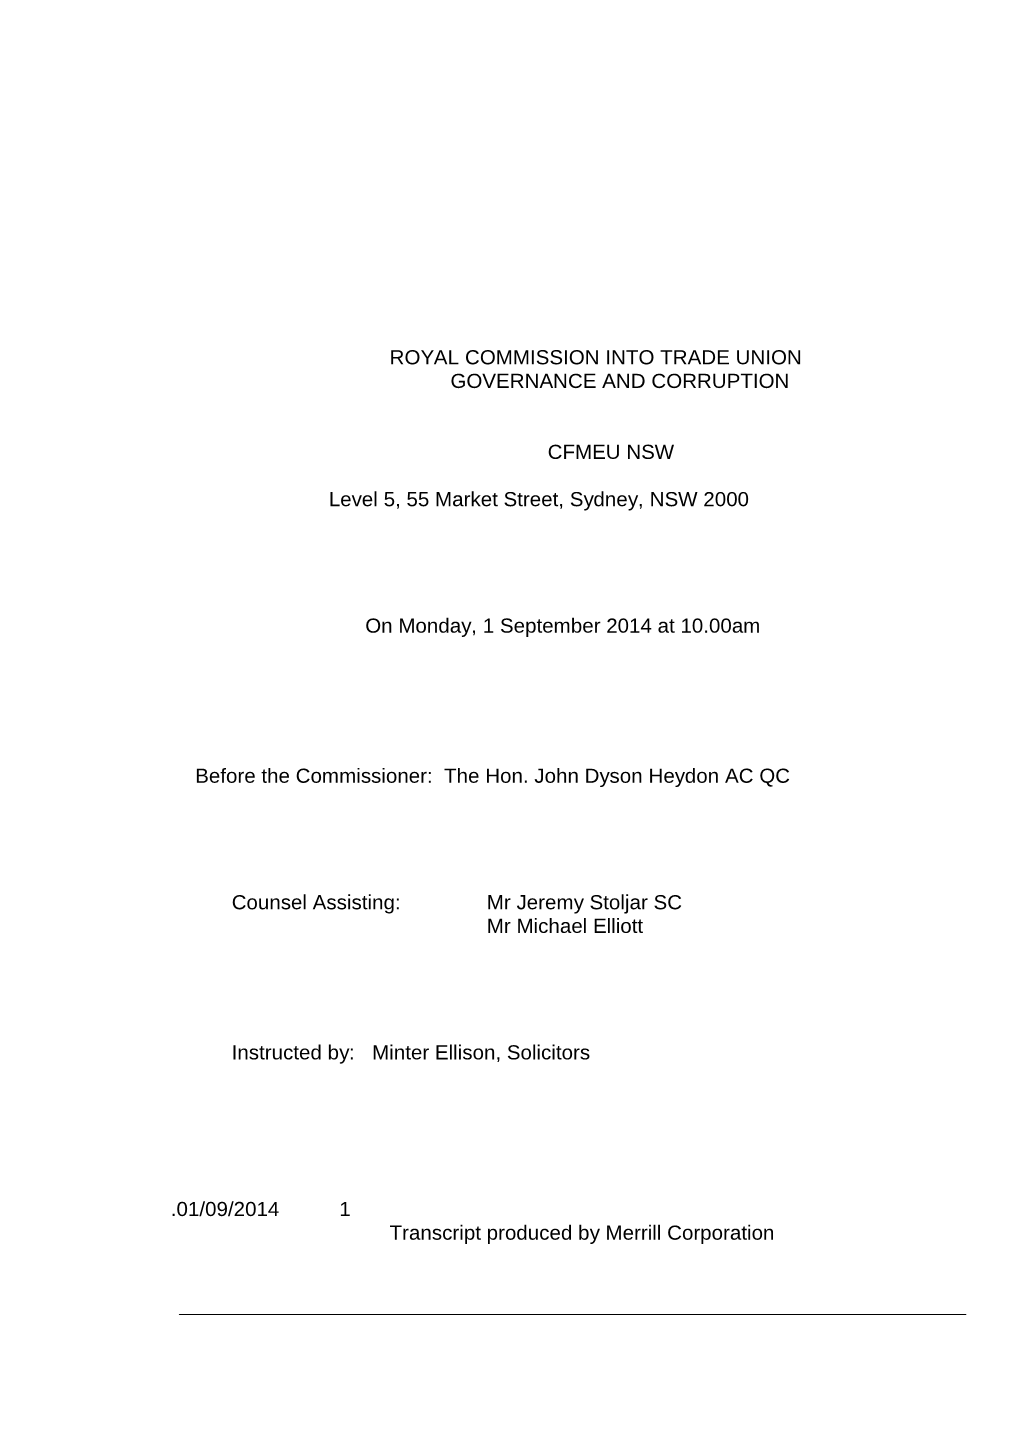 Royal Commission Into Trade Union Governance and Corruption CFMEU NSW Monday, 1 September 2014